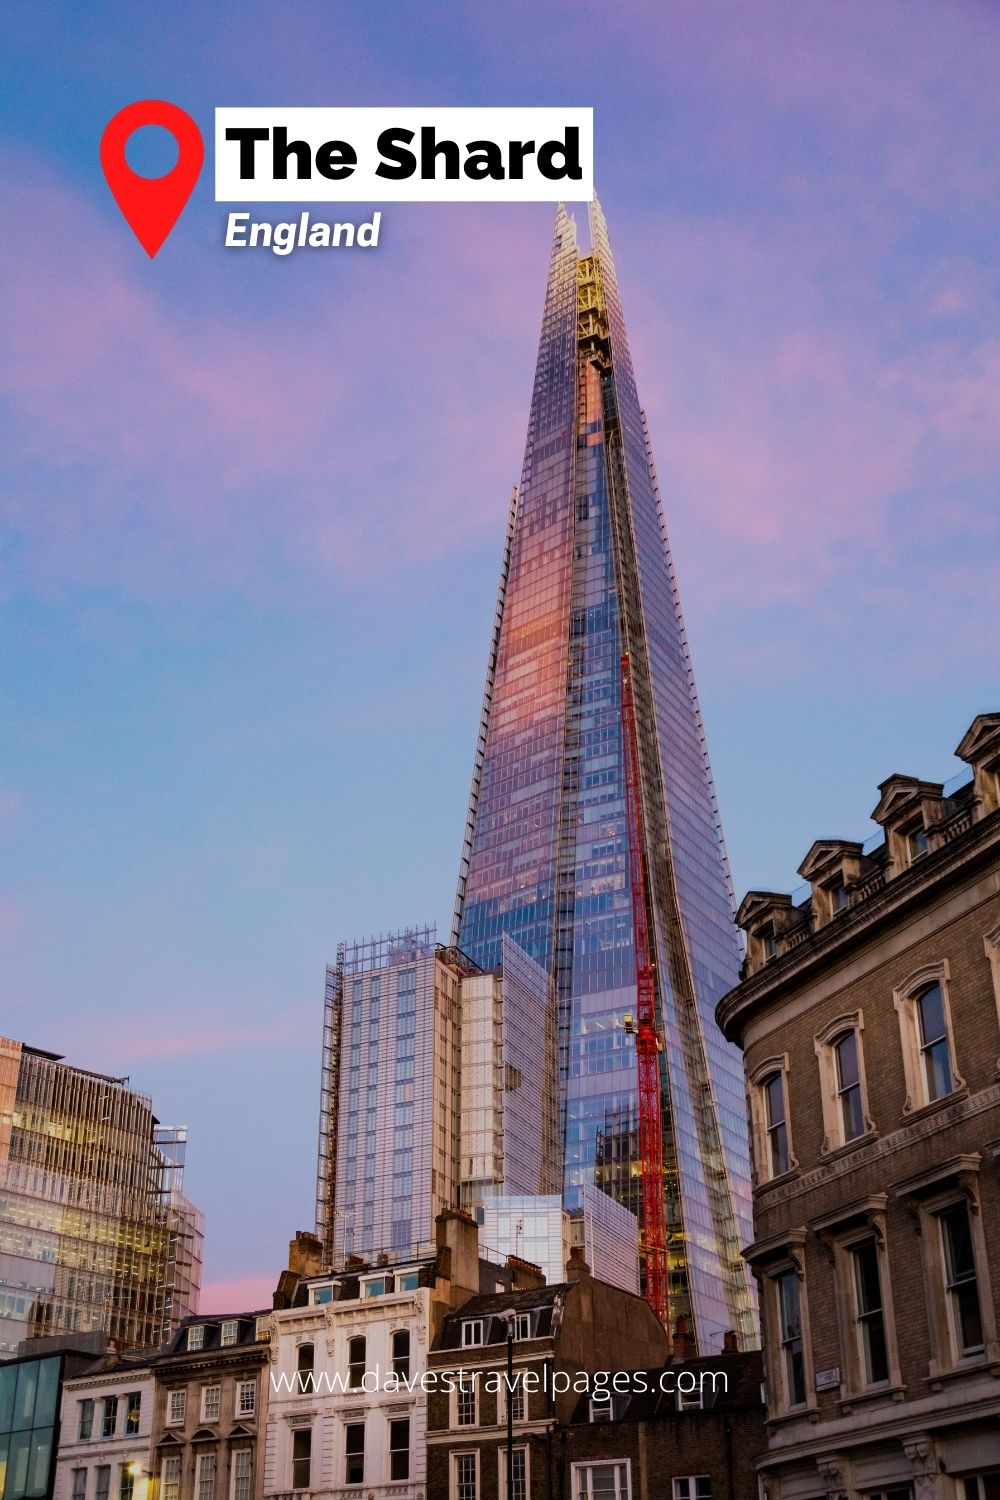 The Shard - A cool building in Europe